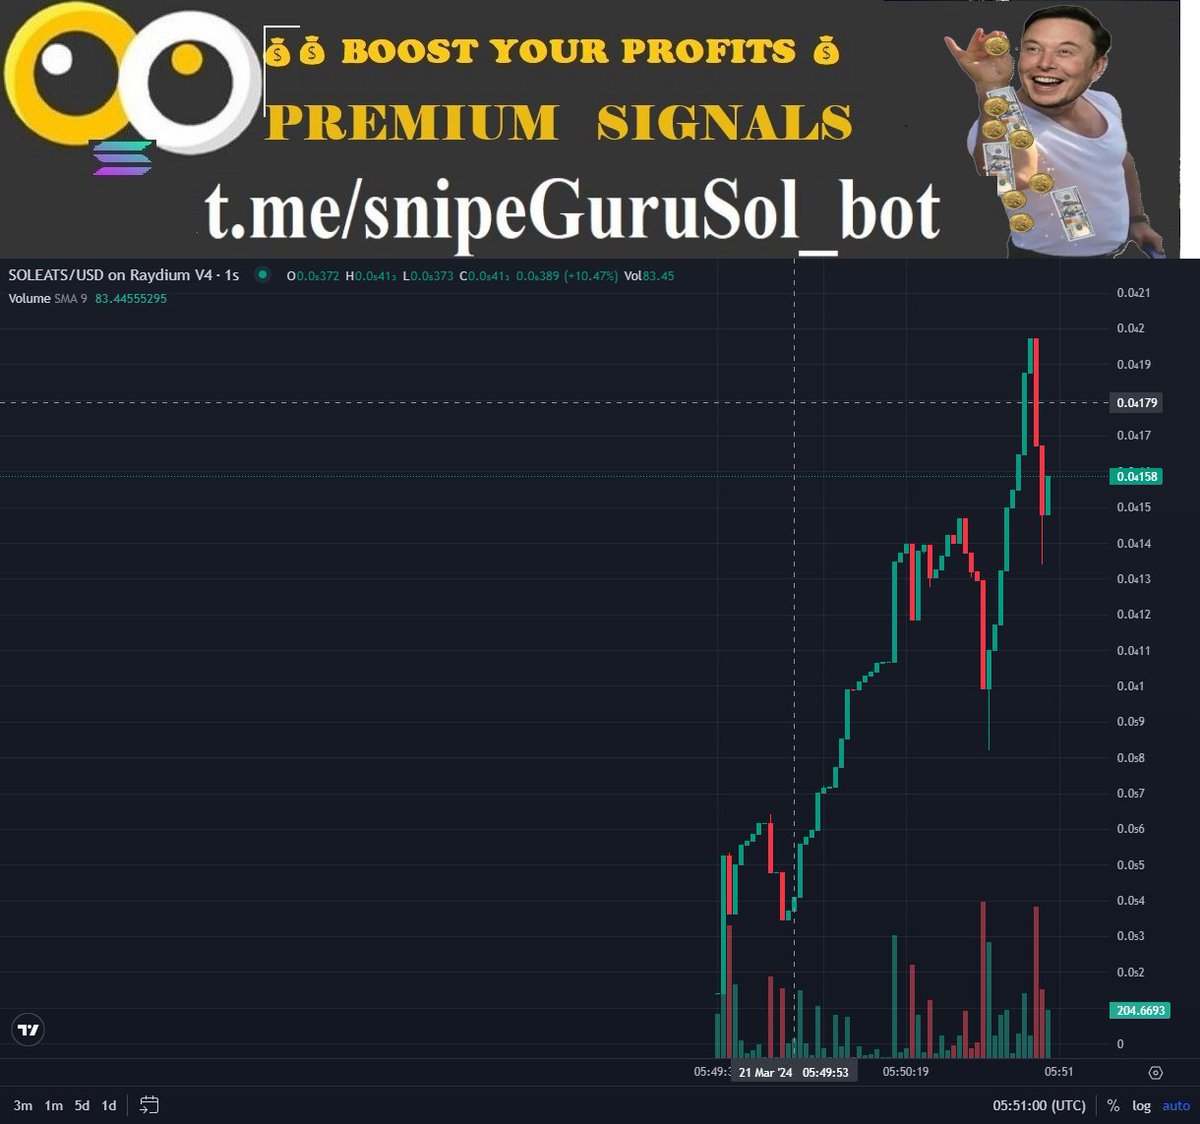 5Mins| 2k+ buy| >50 trader  detected 🚨
#SOLEATS
📝 CA: FPya36SQn6UbindL13MnkhDghtdm2QKHdnqDm3Y2cnHP
⏰ Pair age: 1 m
Liquidity : 8.5962 SOL 
Liquidity USD: $3,311 (All Base + Quote)

MC: $3,618
💵 Price $0.000003618 |  NativePrice: 0.00000001919

💠 Volume: 5m $2,858 | 1h $2,858…